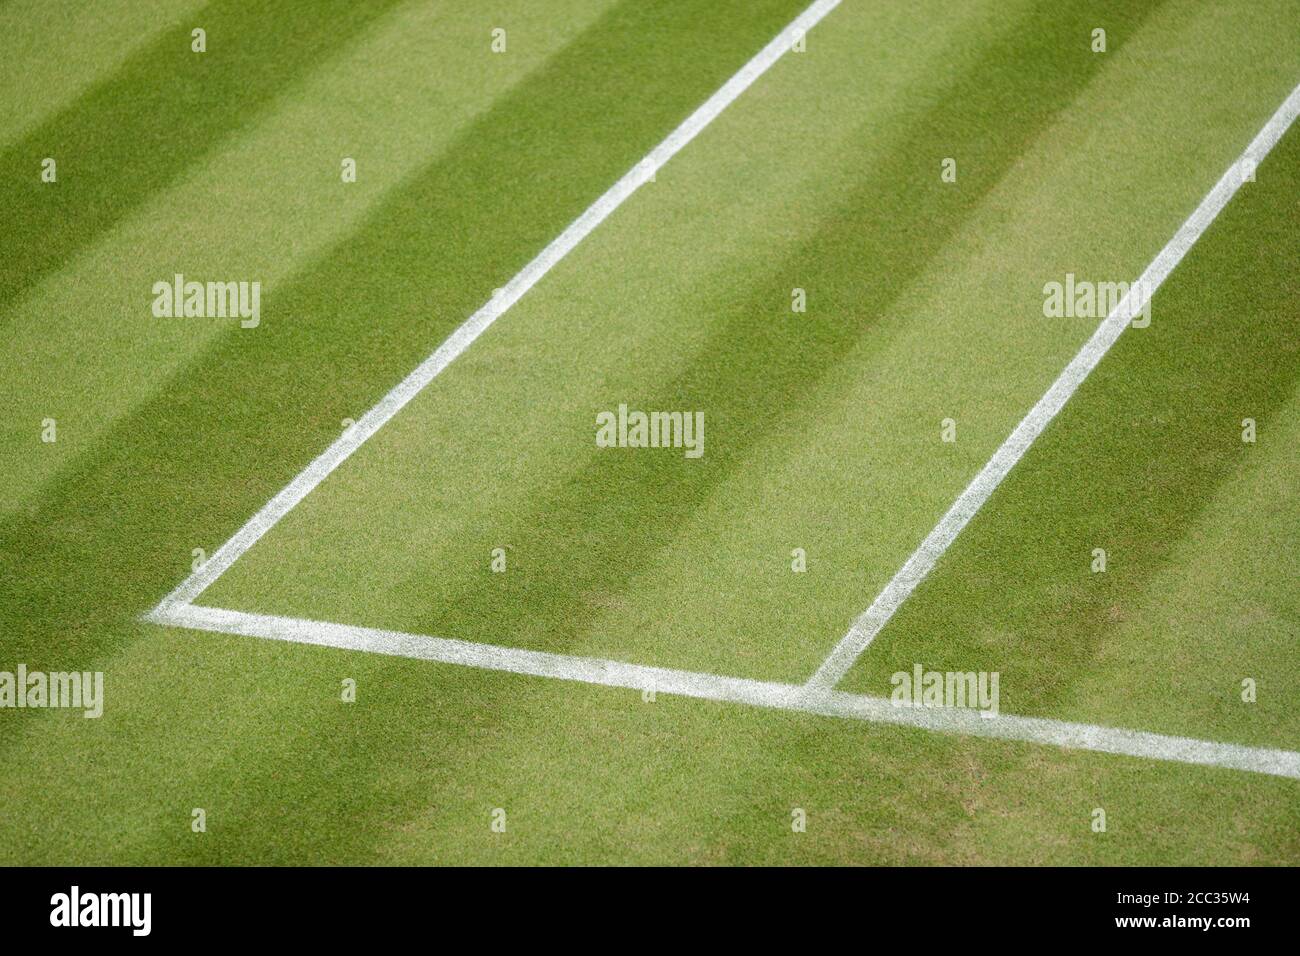 Court lines on a tennis court Stock Photo Alamy